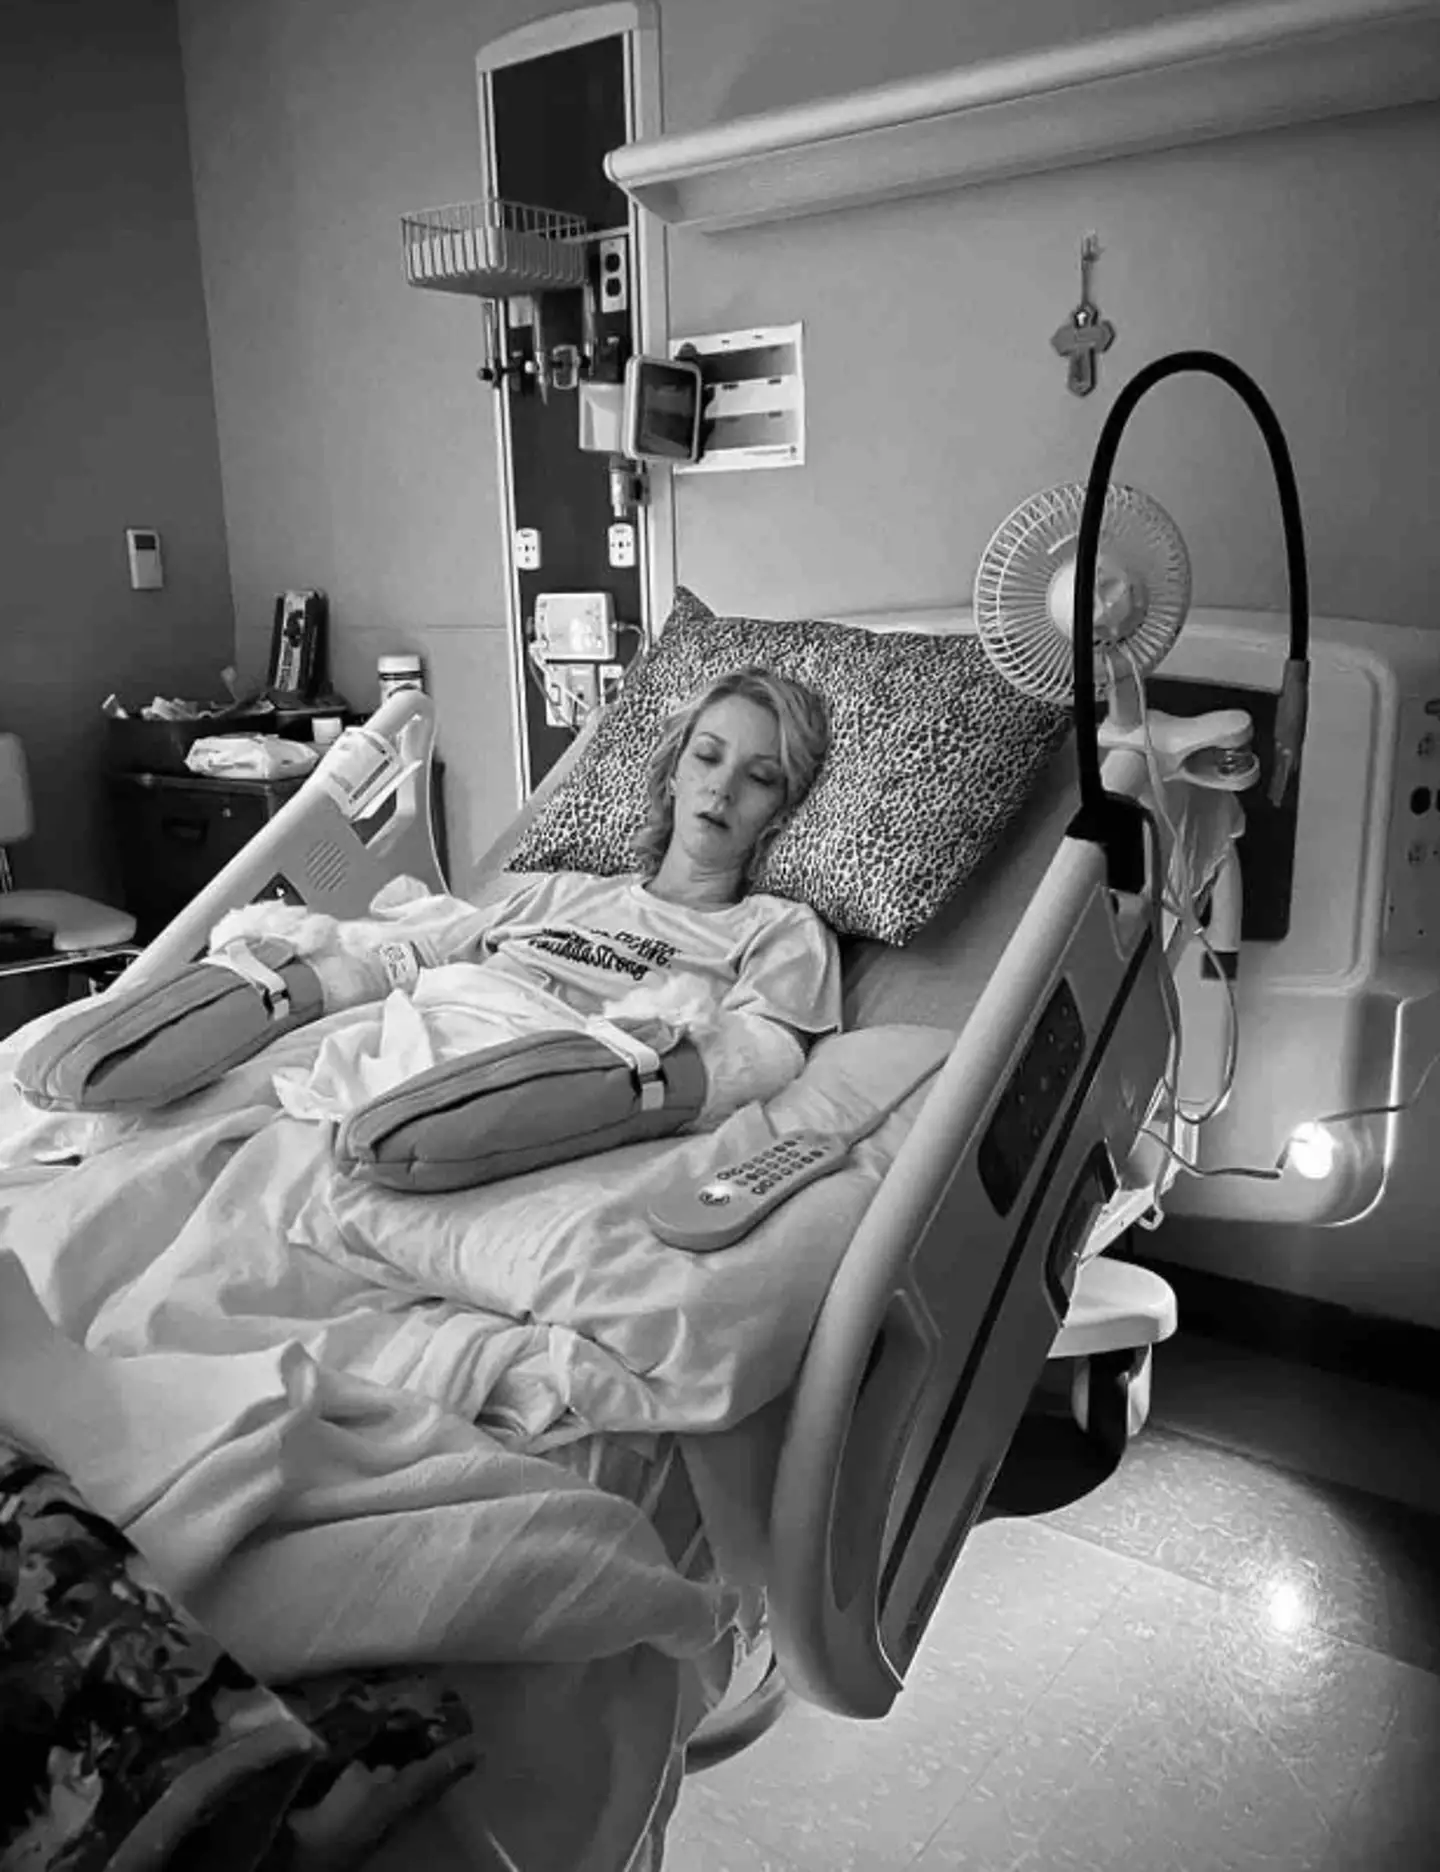 She contracted sepsis leading to a quadruple amputation.